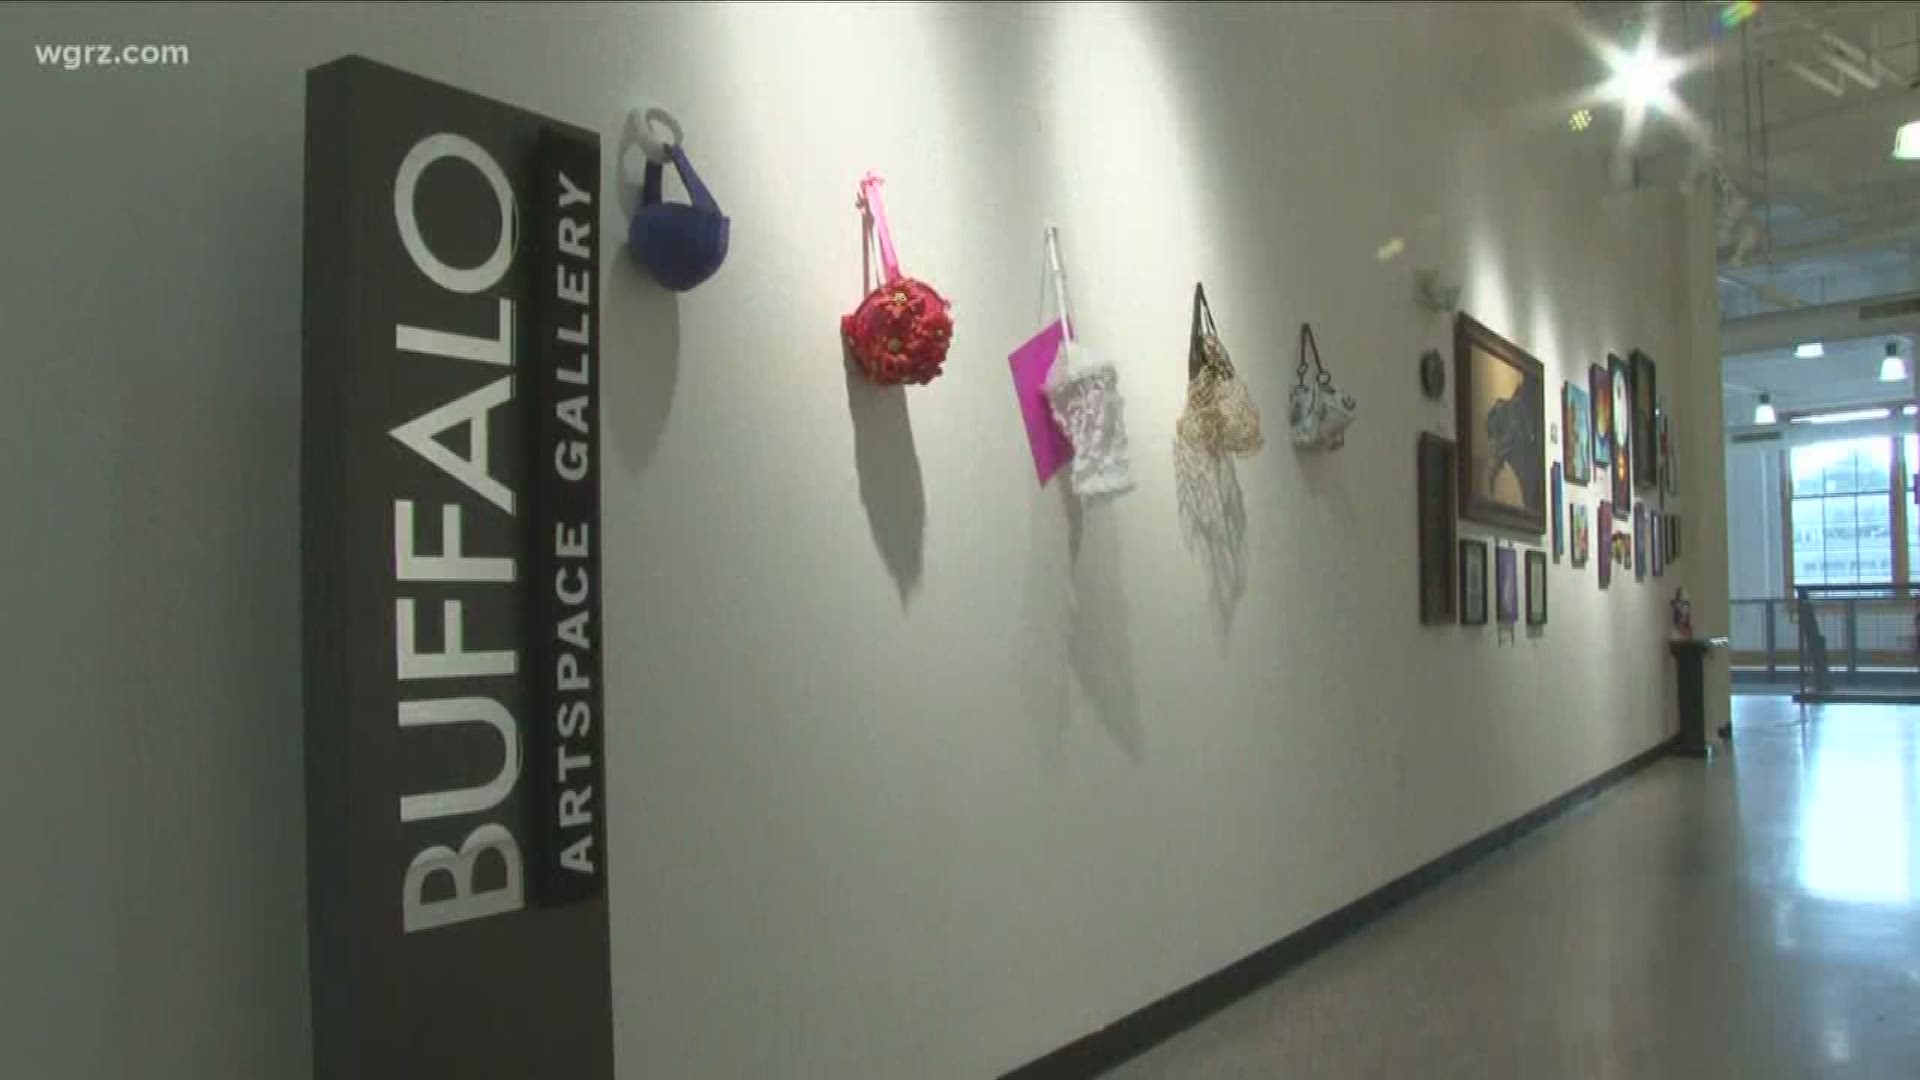 The bra purse creations will be hung in Artspace Buffalo's gallery on Main Street during the month of September and then auctioned off for charity.